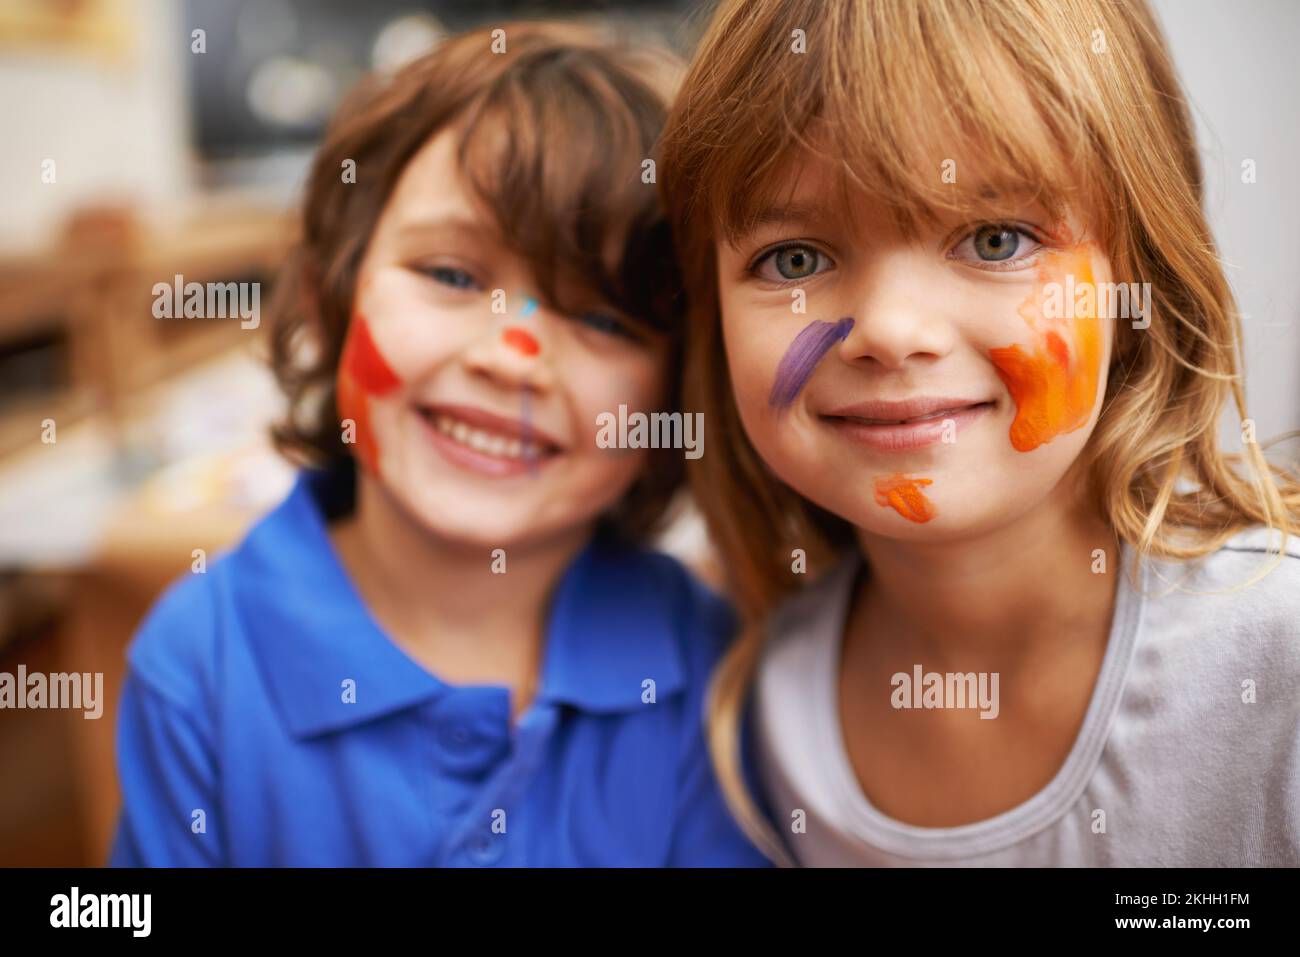 Being an artist is messy business. A portrait of two cute young siblings with faces full of paint. Stock Photo